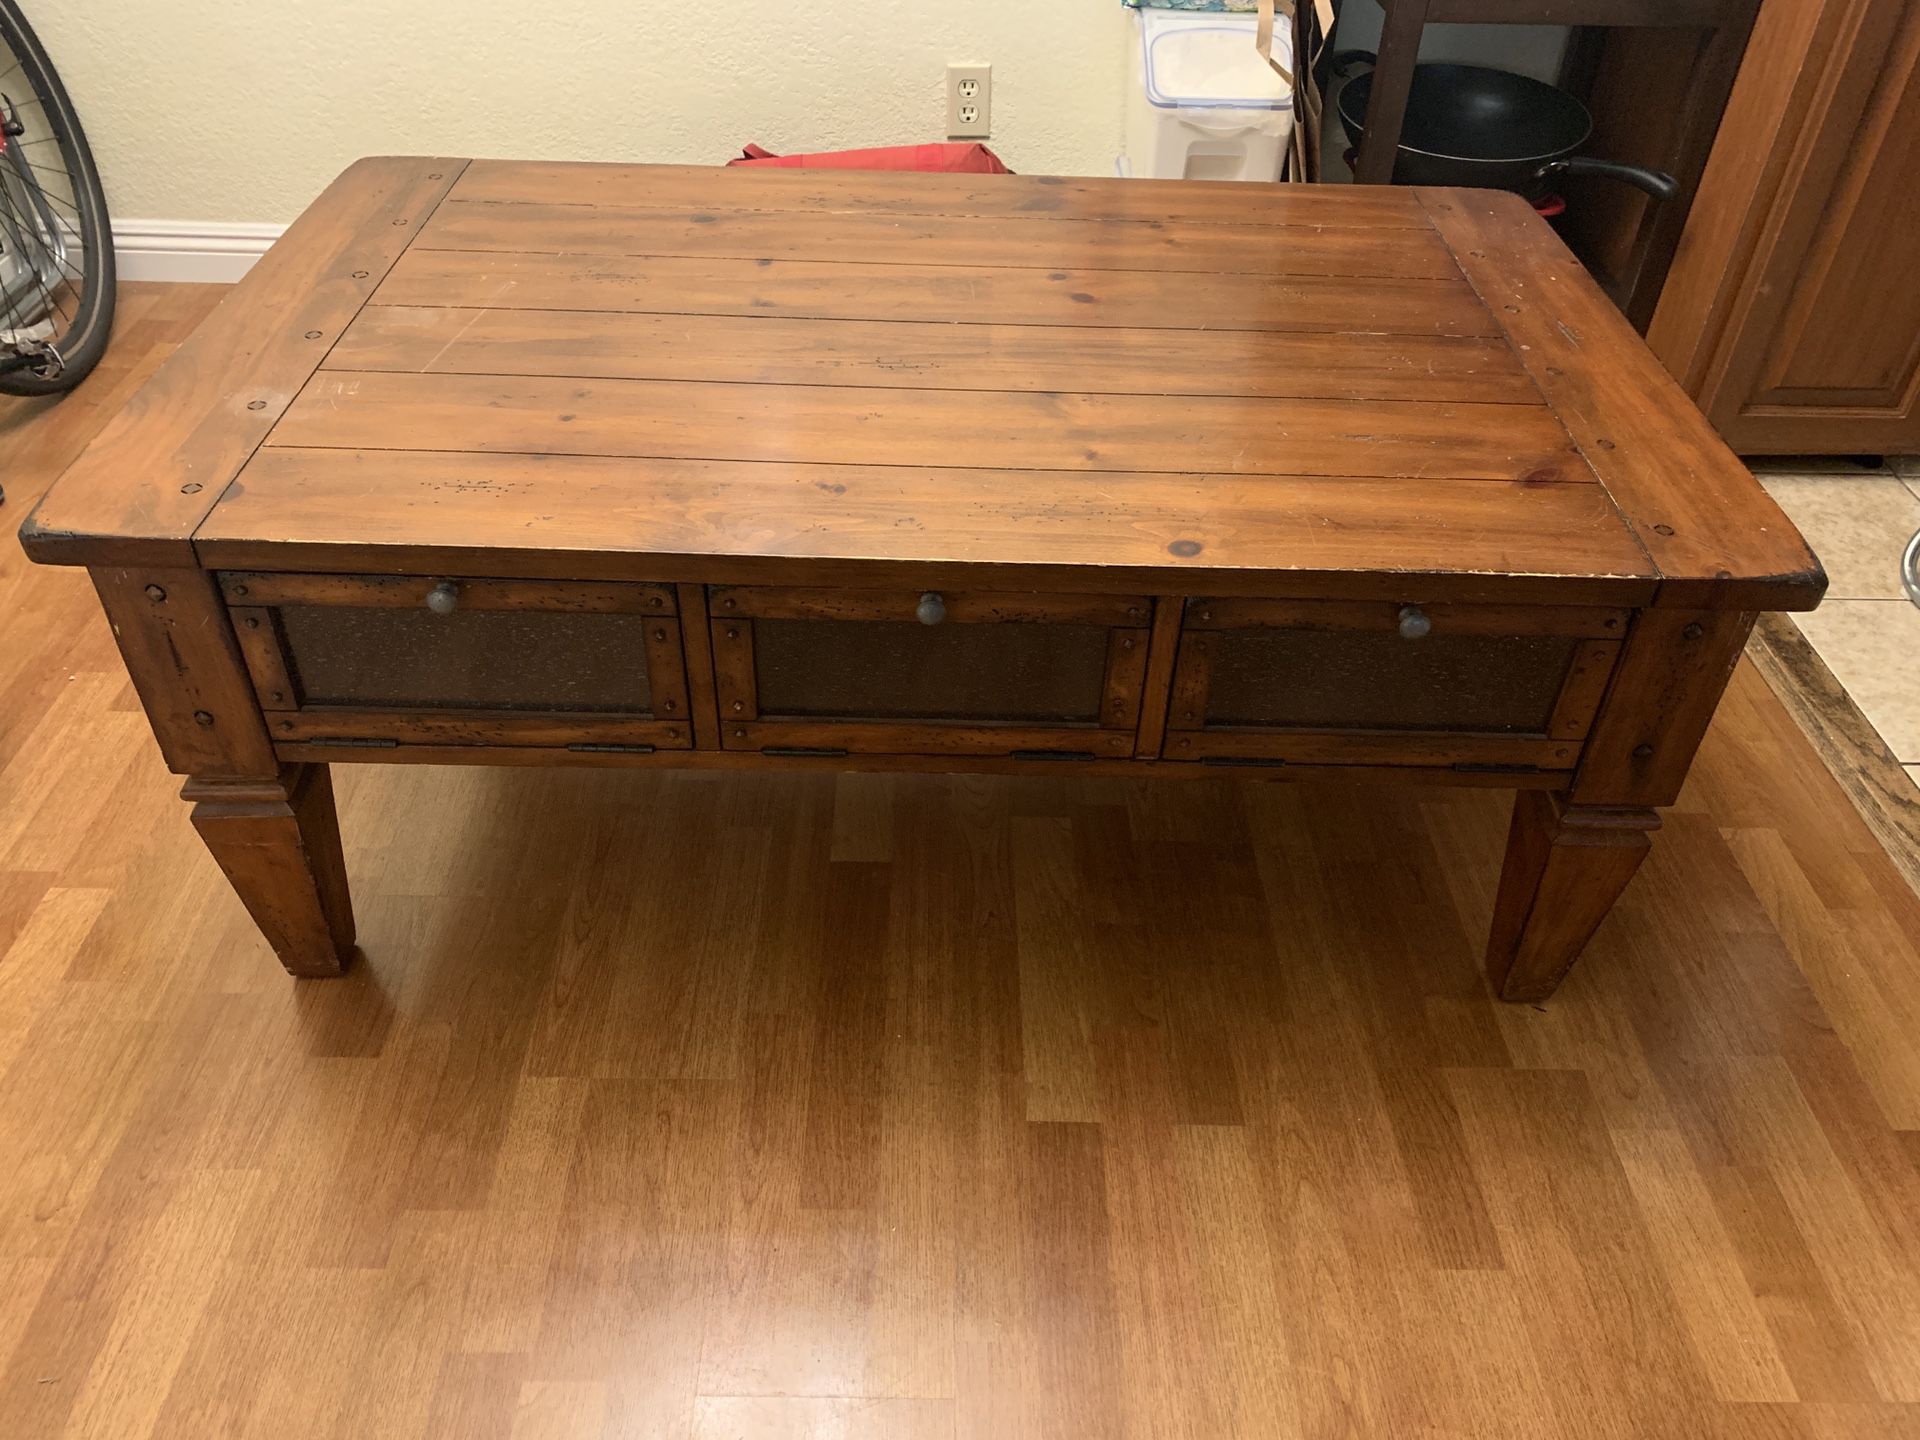 Coffee table solid wood, distressed with storage cabinet drawers